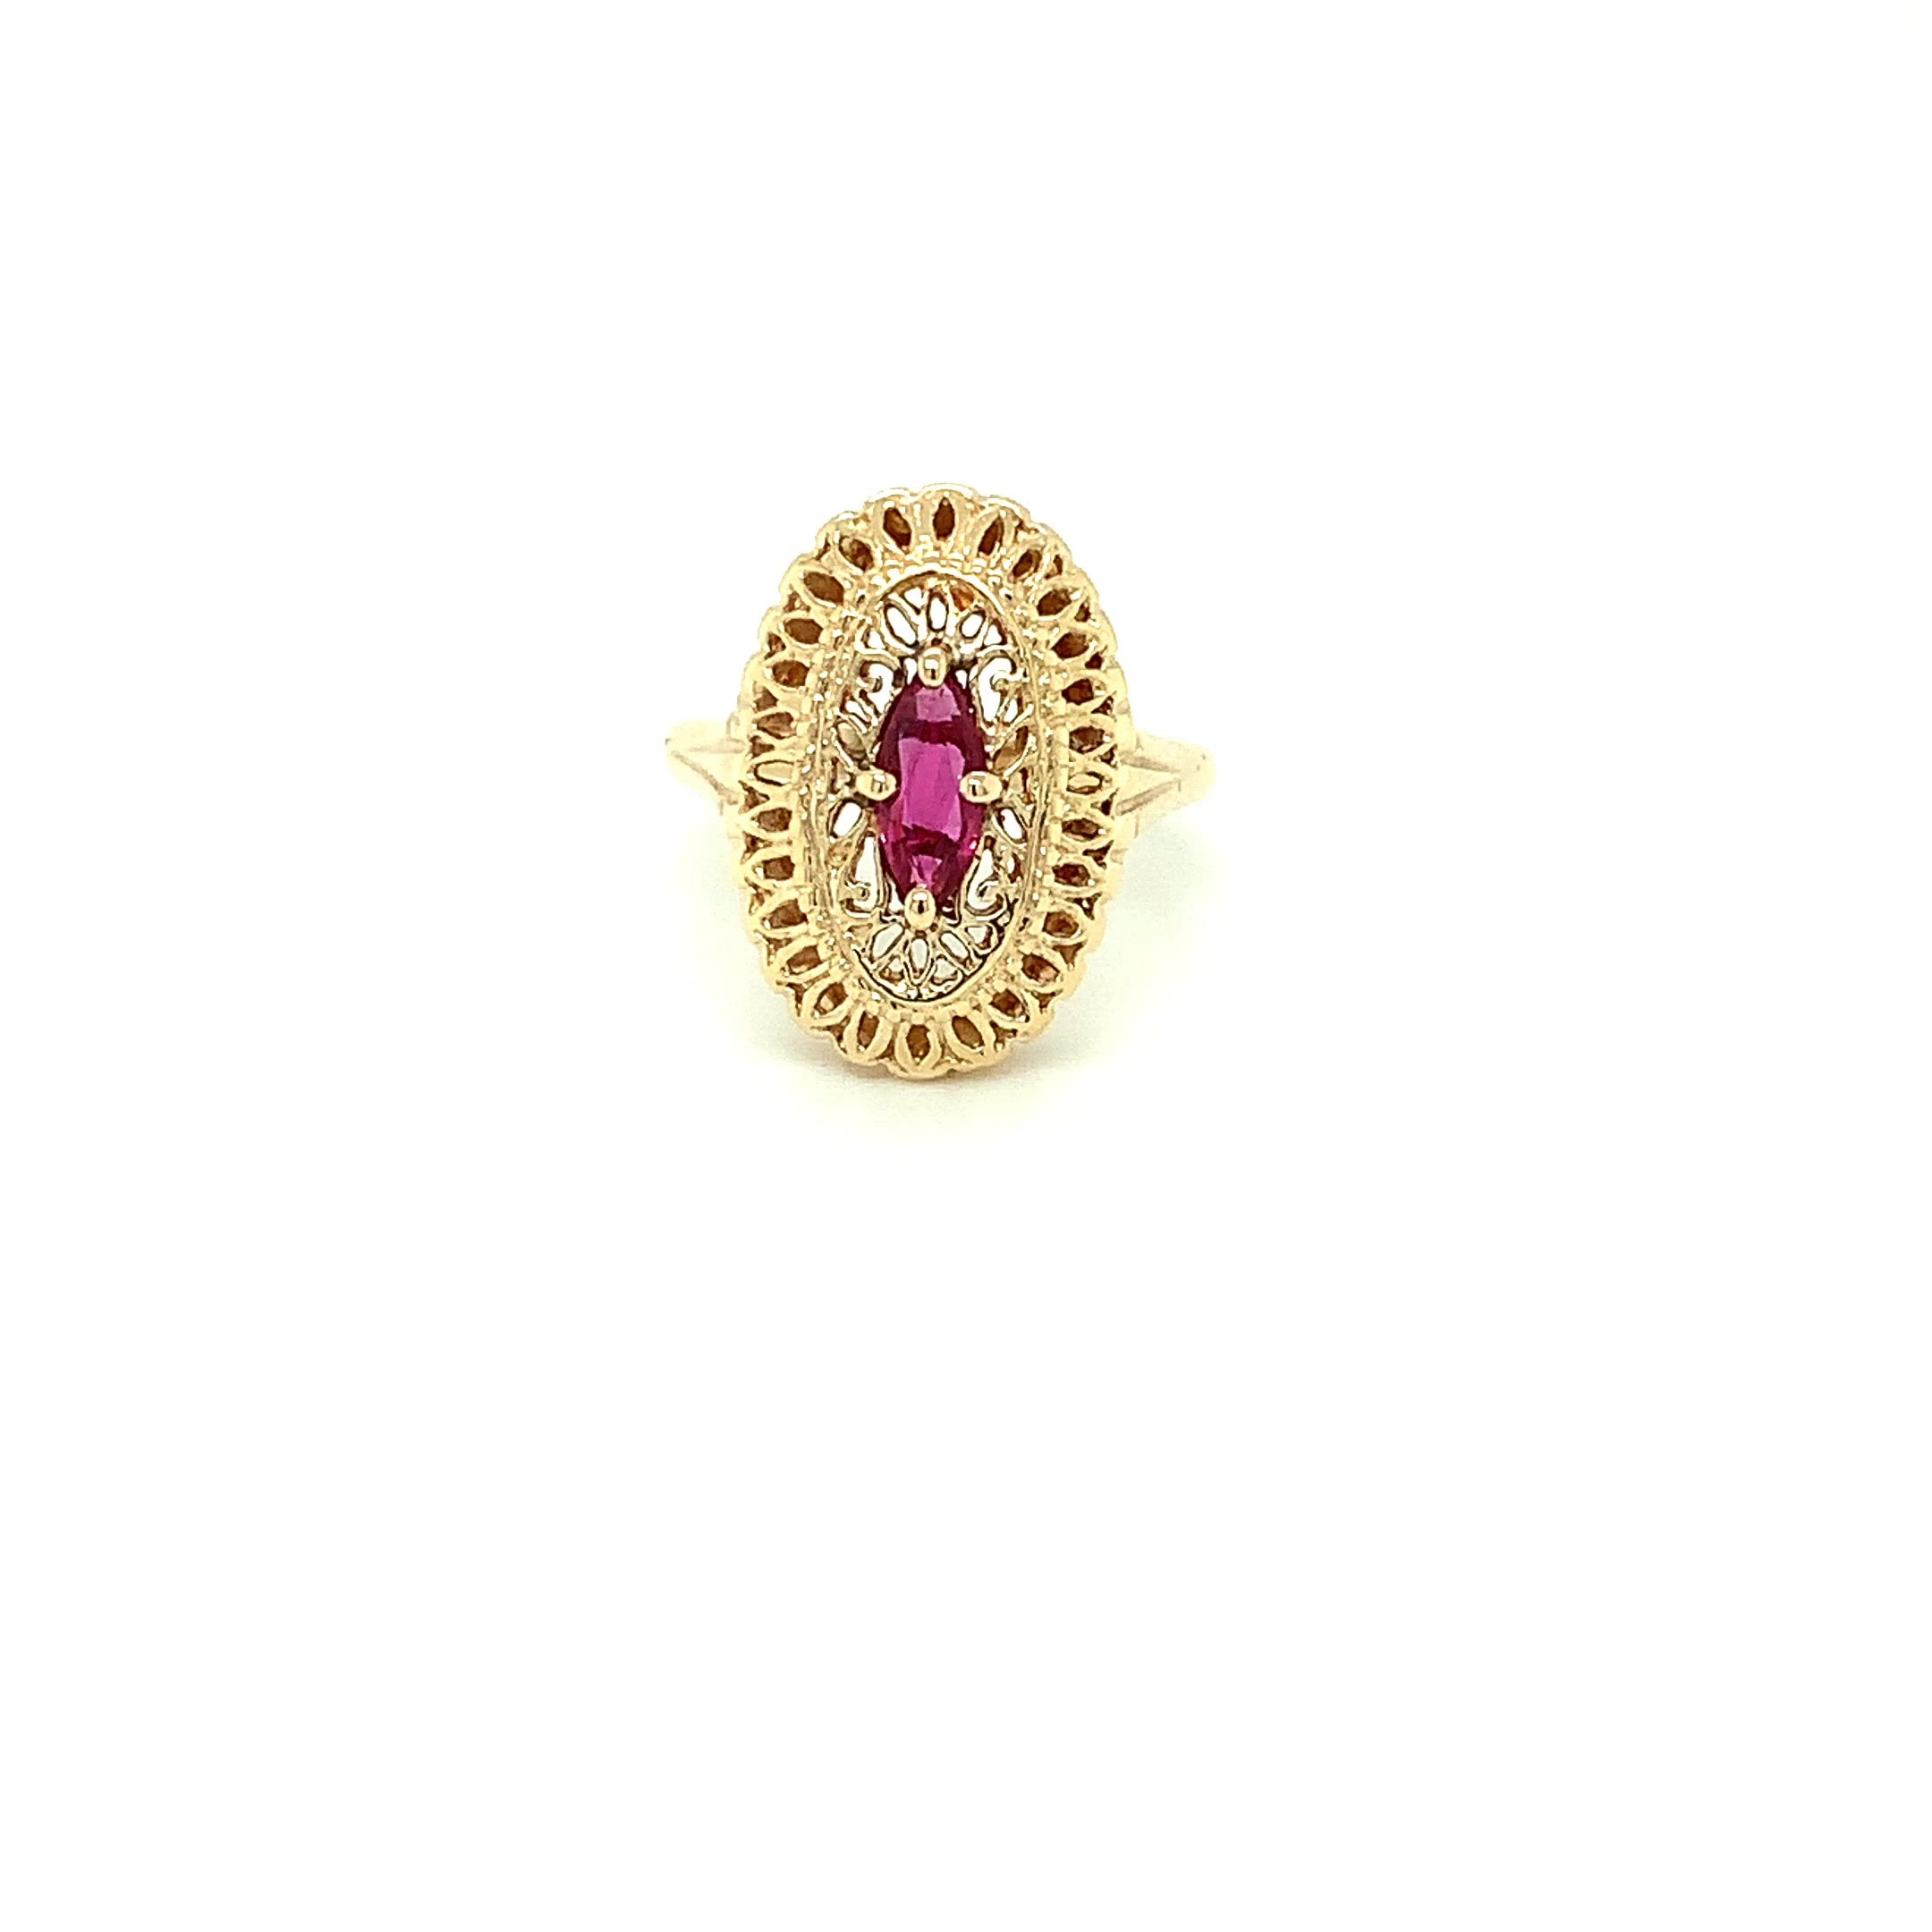 Natural Ruby Ring 14K Solid Gold .68ct Vintage Ring Gemstone Ring Solitaire Ring Marquise Ring Ladies Ring Women's Ring Fine Estate Jewelry